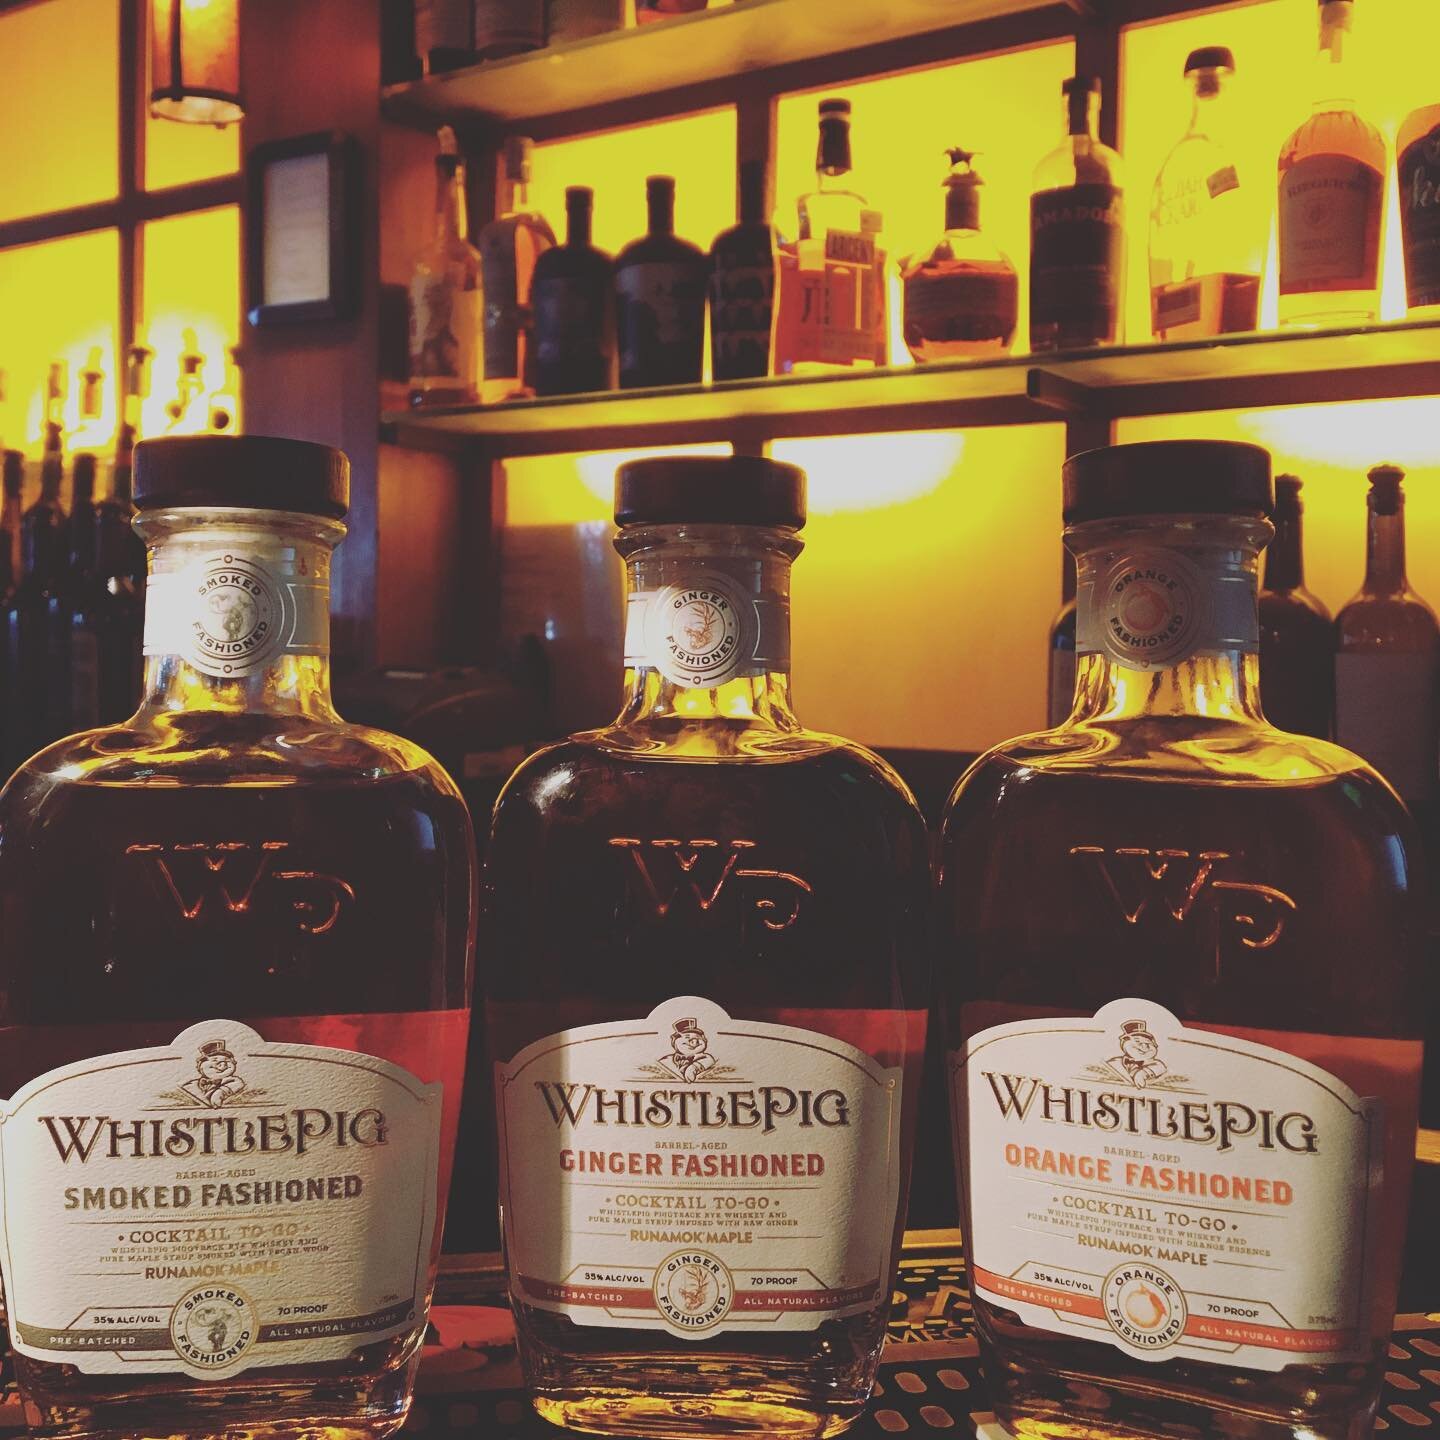 Coming Soon...

Enjoy a fine @whistlepigwhiskey cocktail to-go with your food!